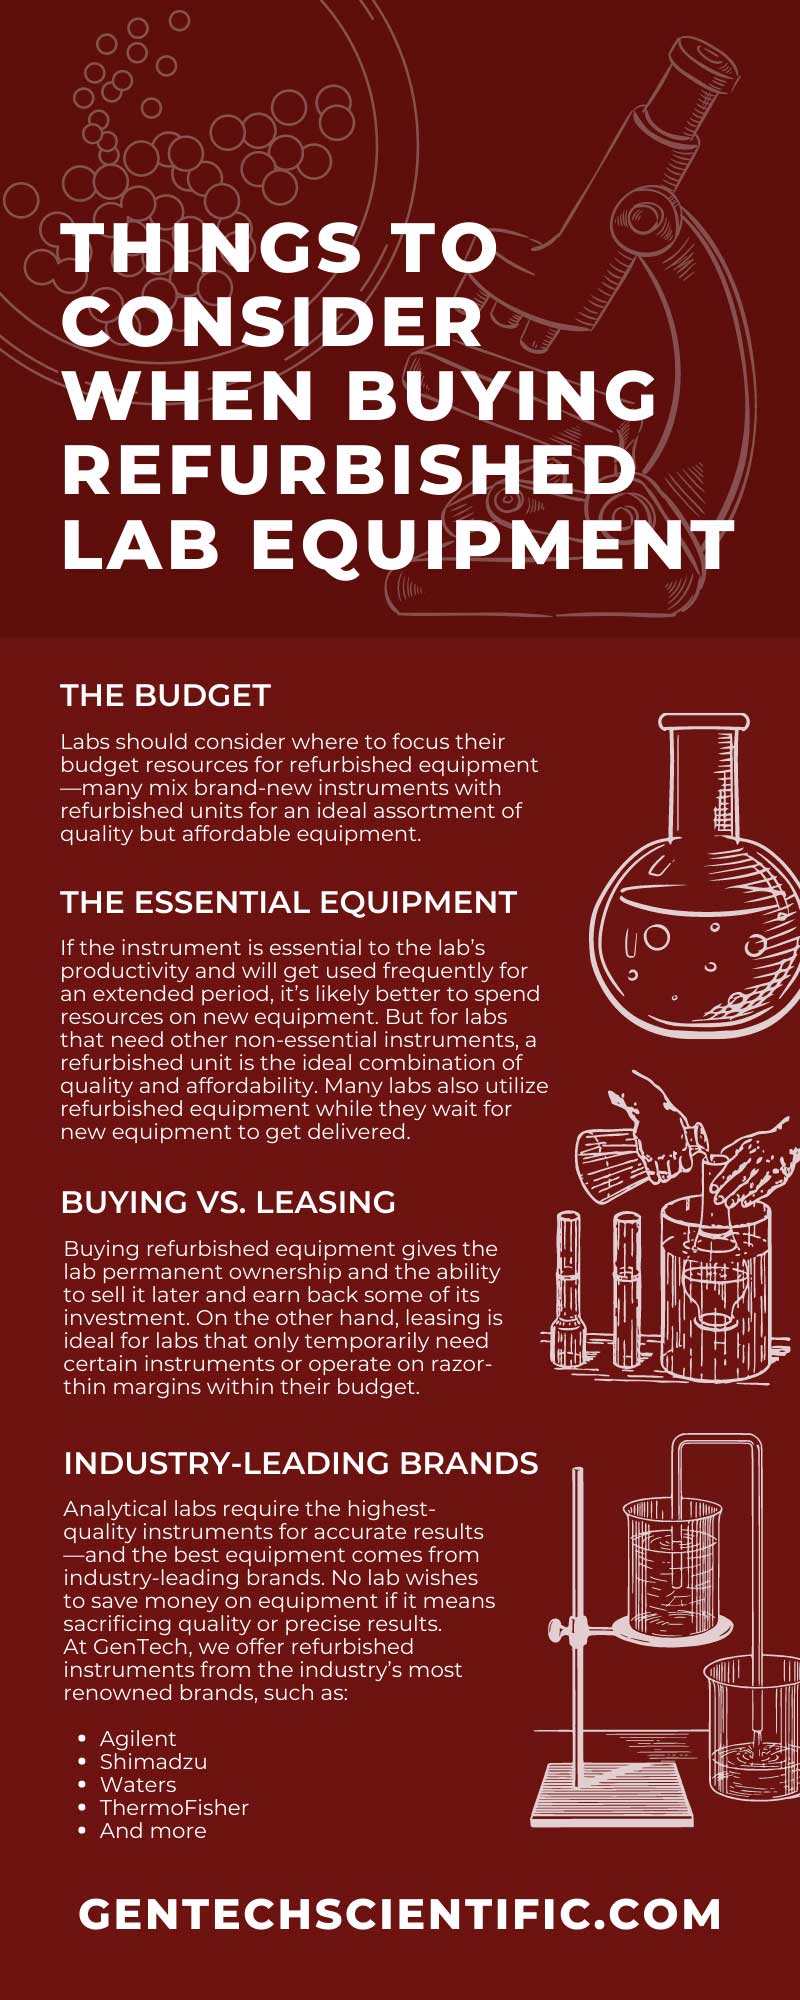 Things To Consider When Buying Refurbished Lab Equipment